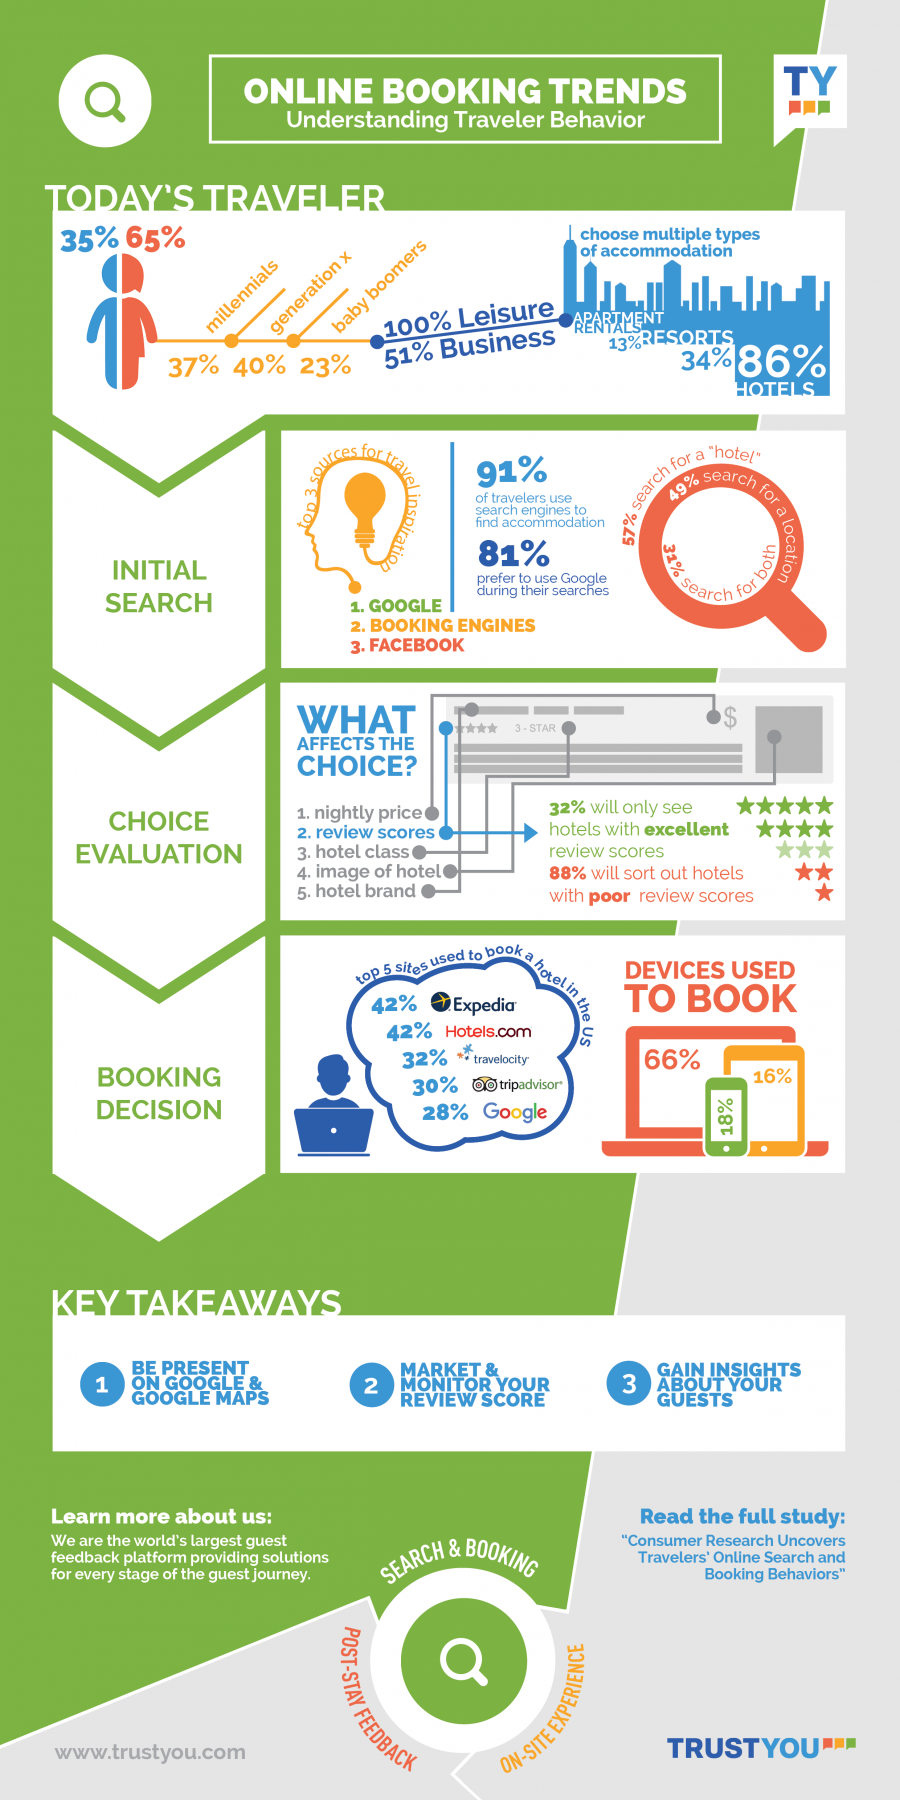 Research Infographic